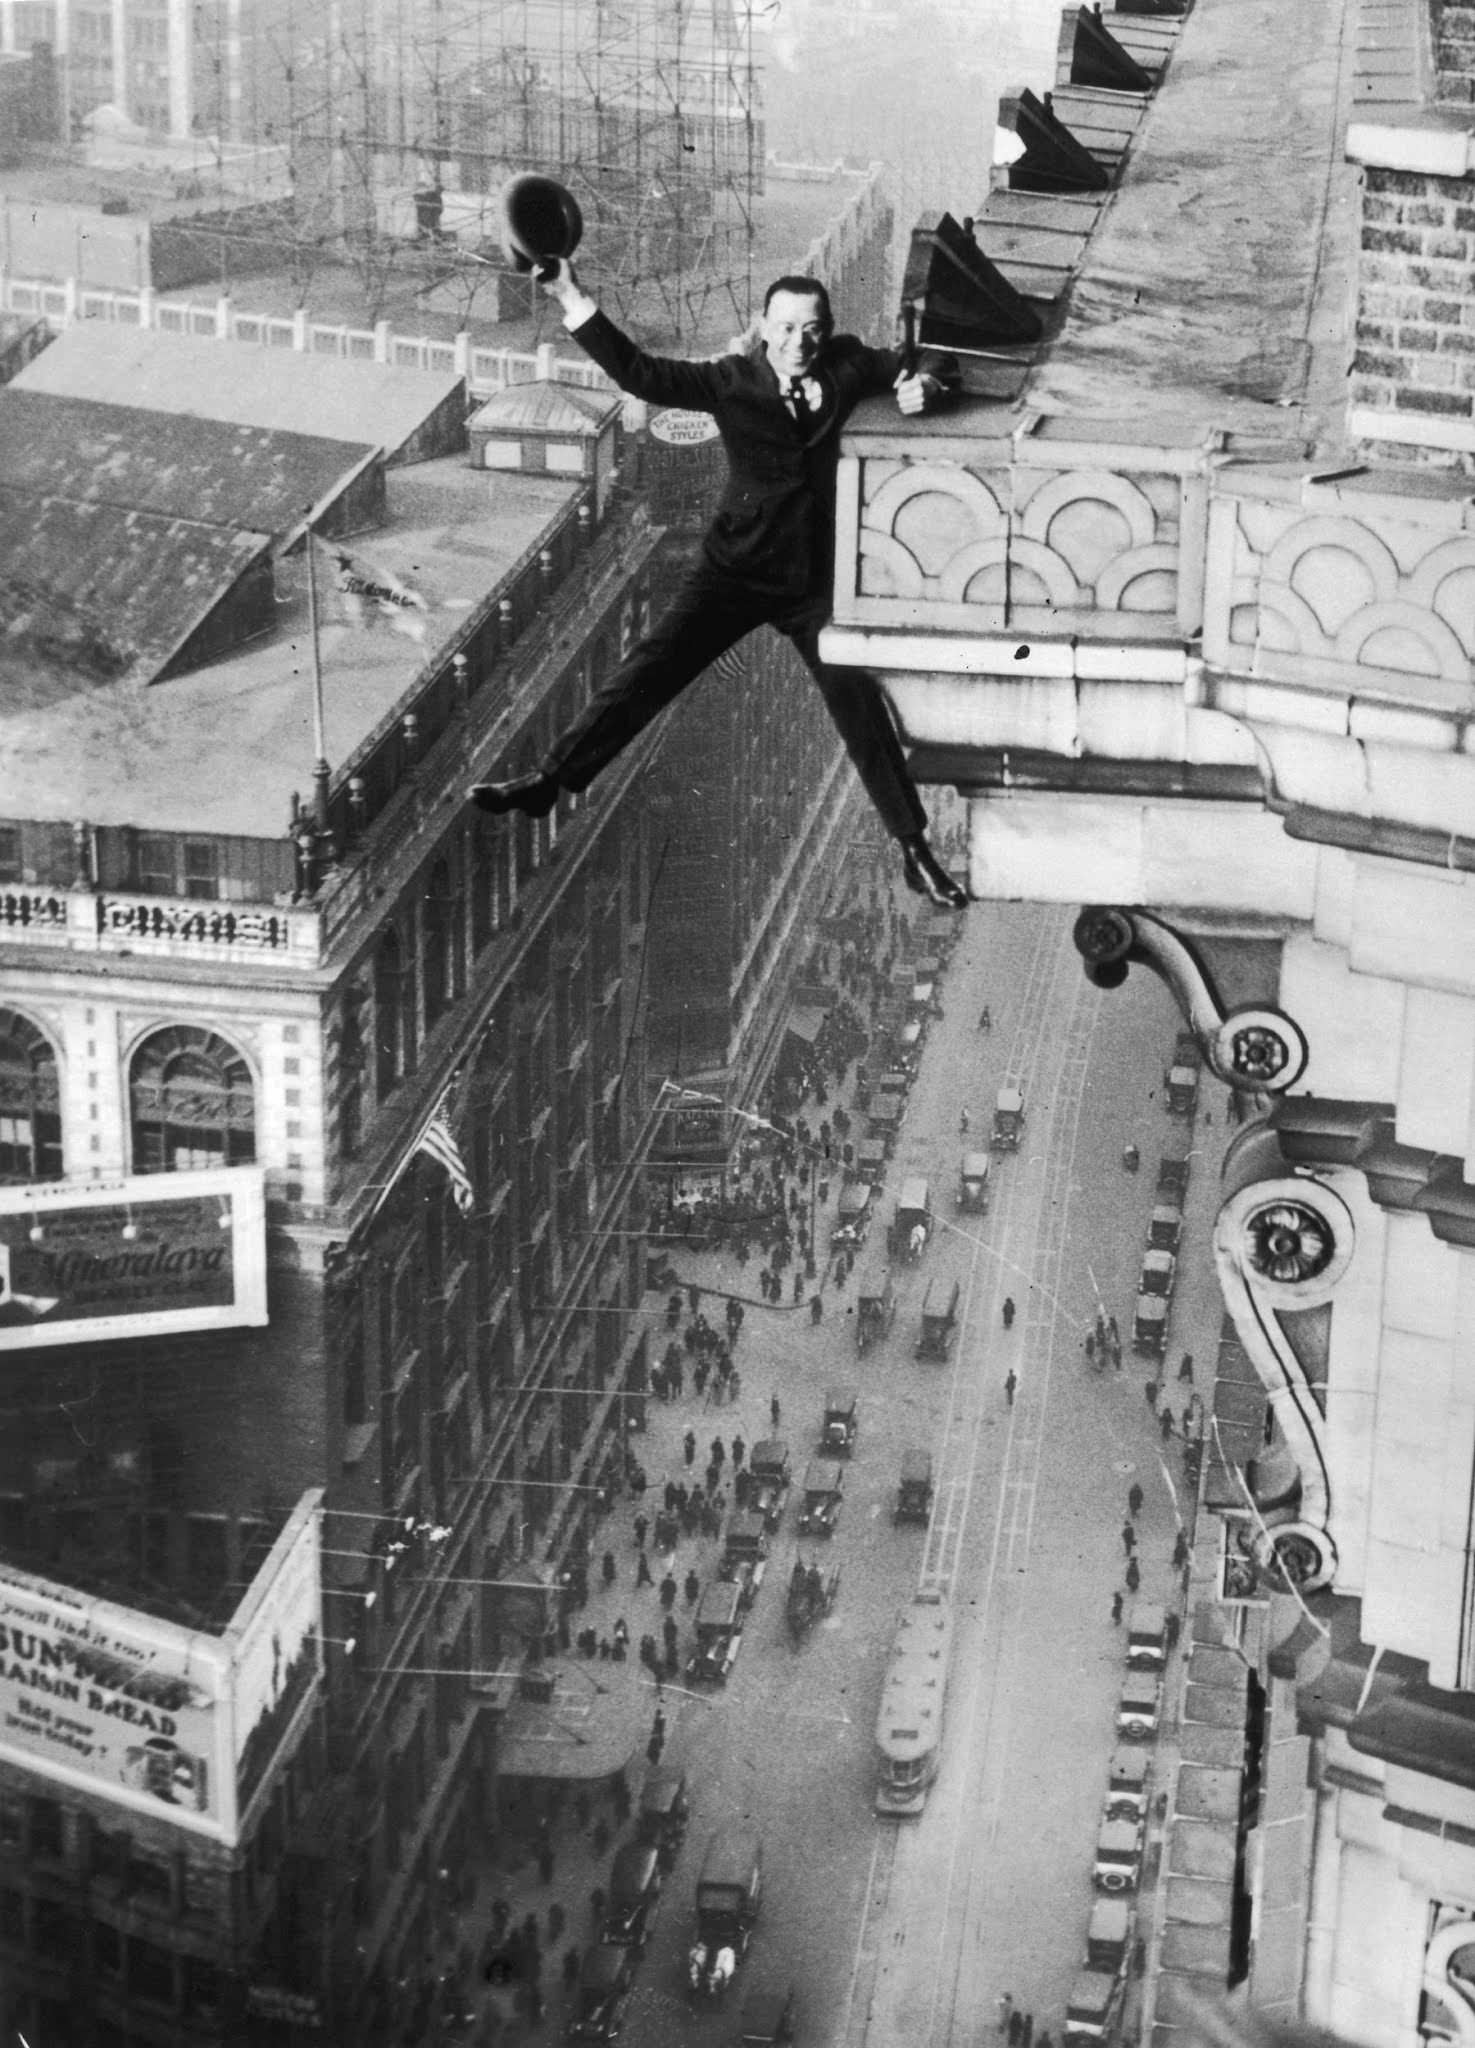 Harry Gardiner: The First Human Fly Who Climbed Skyscrapers from the Ground in the early 20th Century